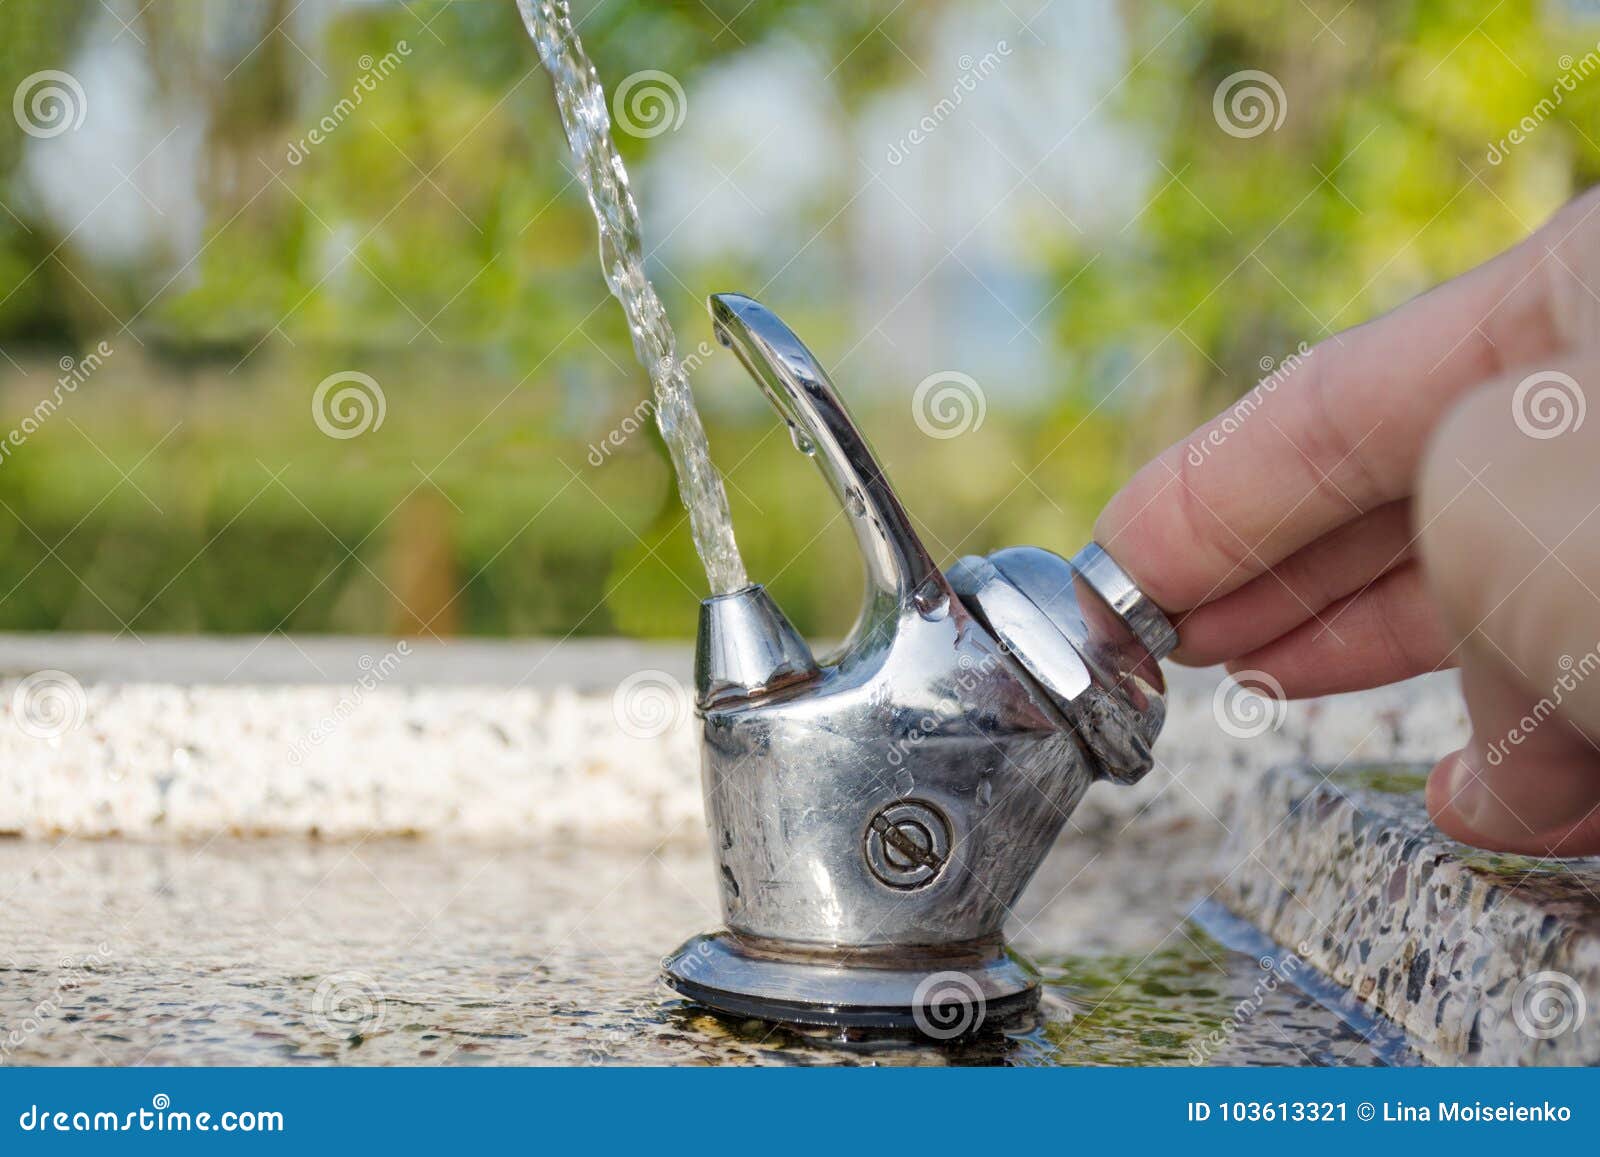 Drinking Street Fountain. He Hand Presses The Water Supply